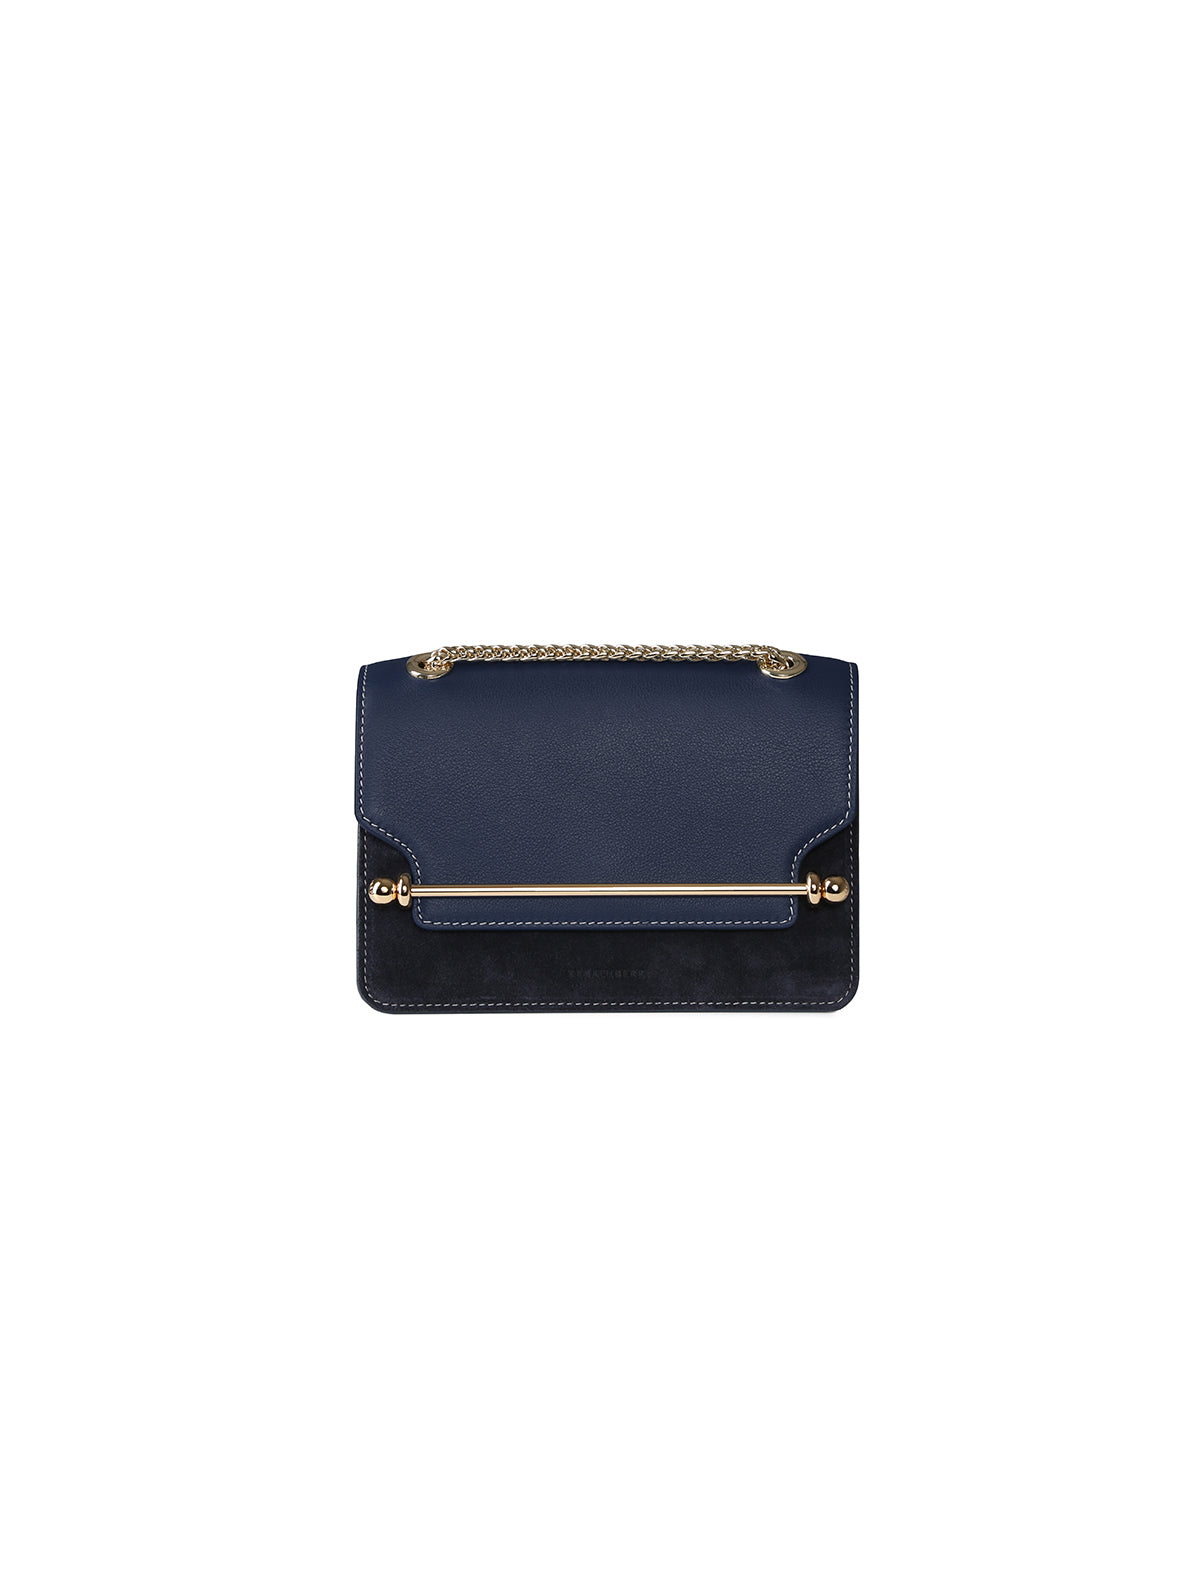 STRATHBERRY East/West Mini Bag in Leather Suede Navy with Grey Stitch